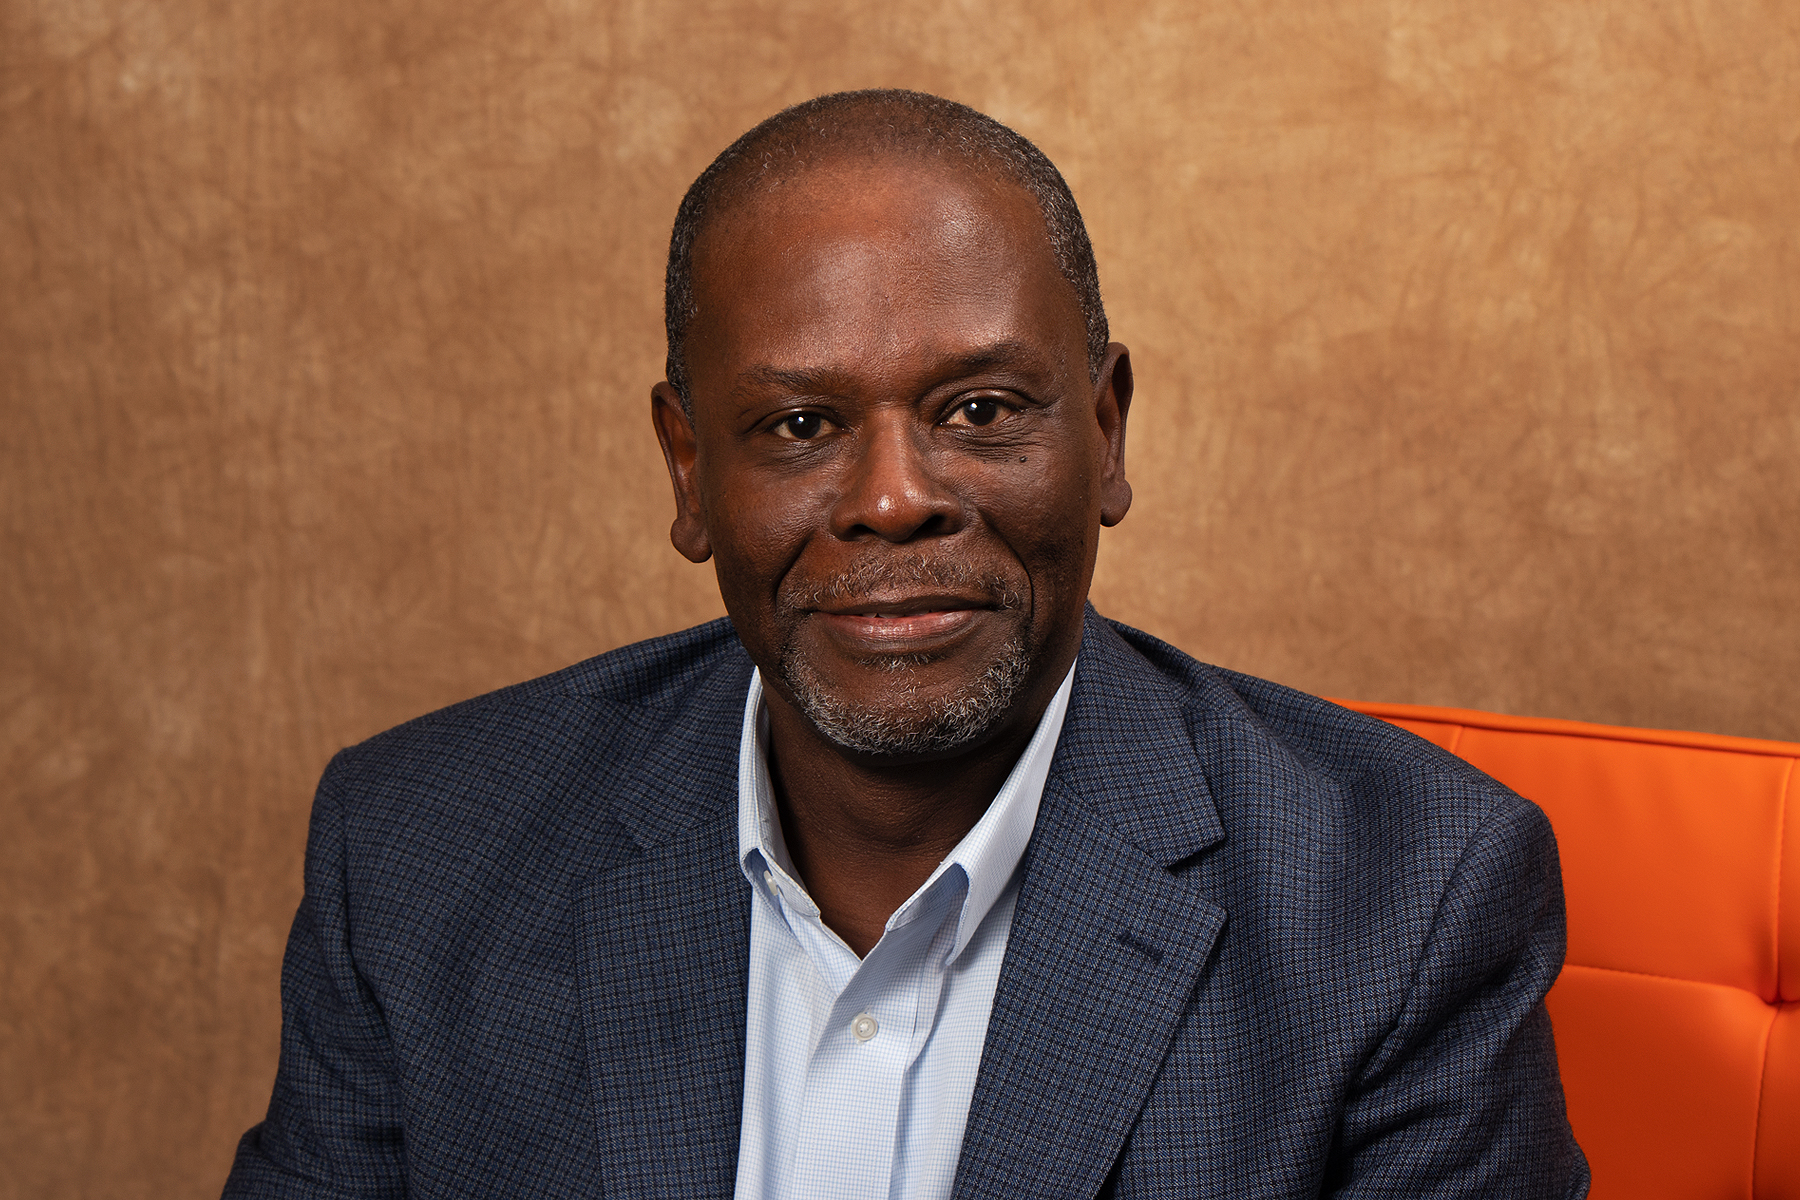 Avadian Hires Richard Busby to Lead Diversity, Equity, and Inclusion Efforts